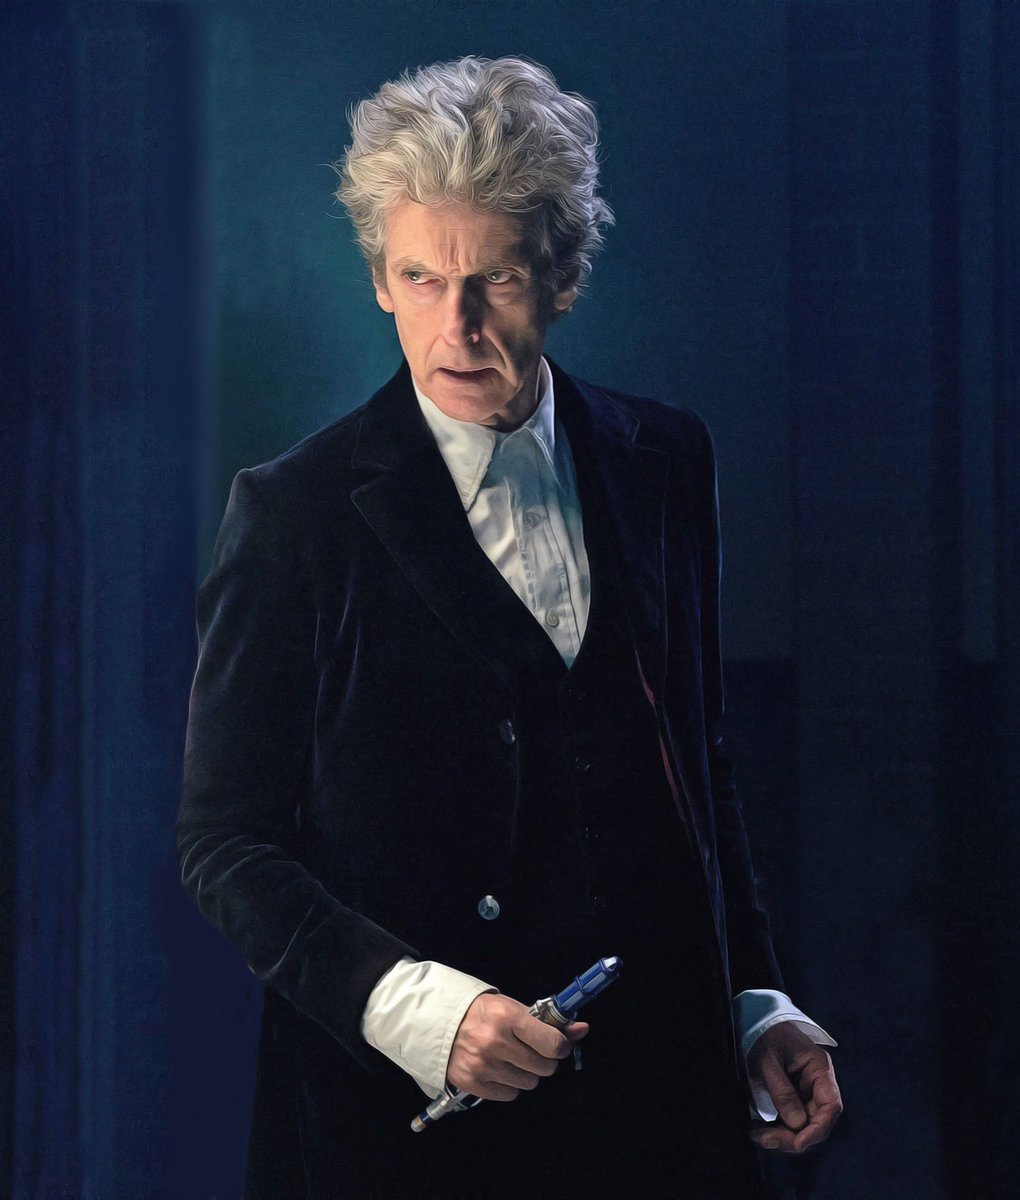 you lose a point if you think the twelfth doctor is attractive